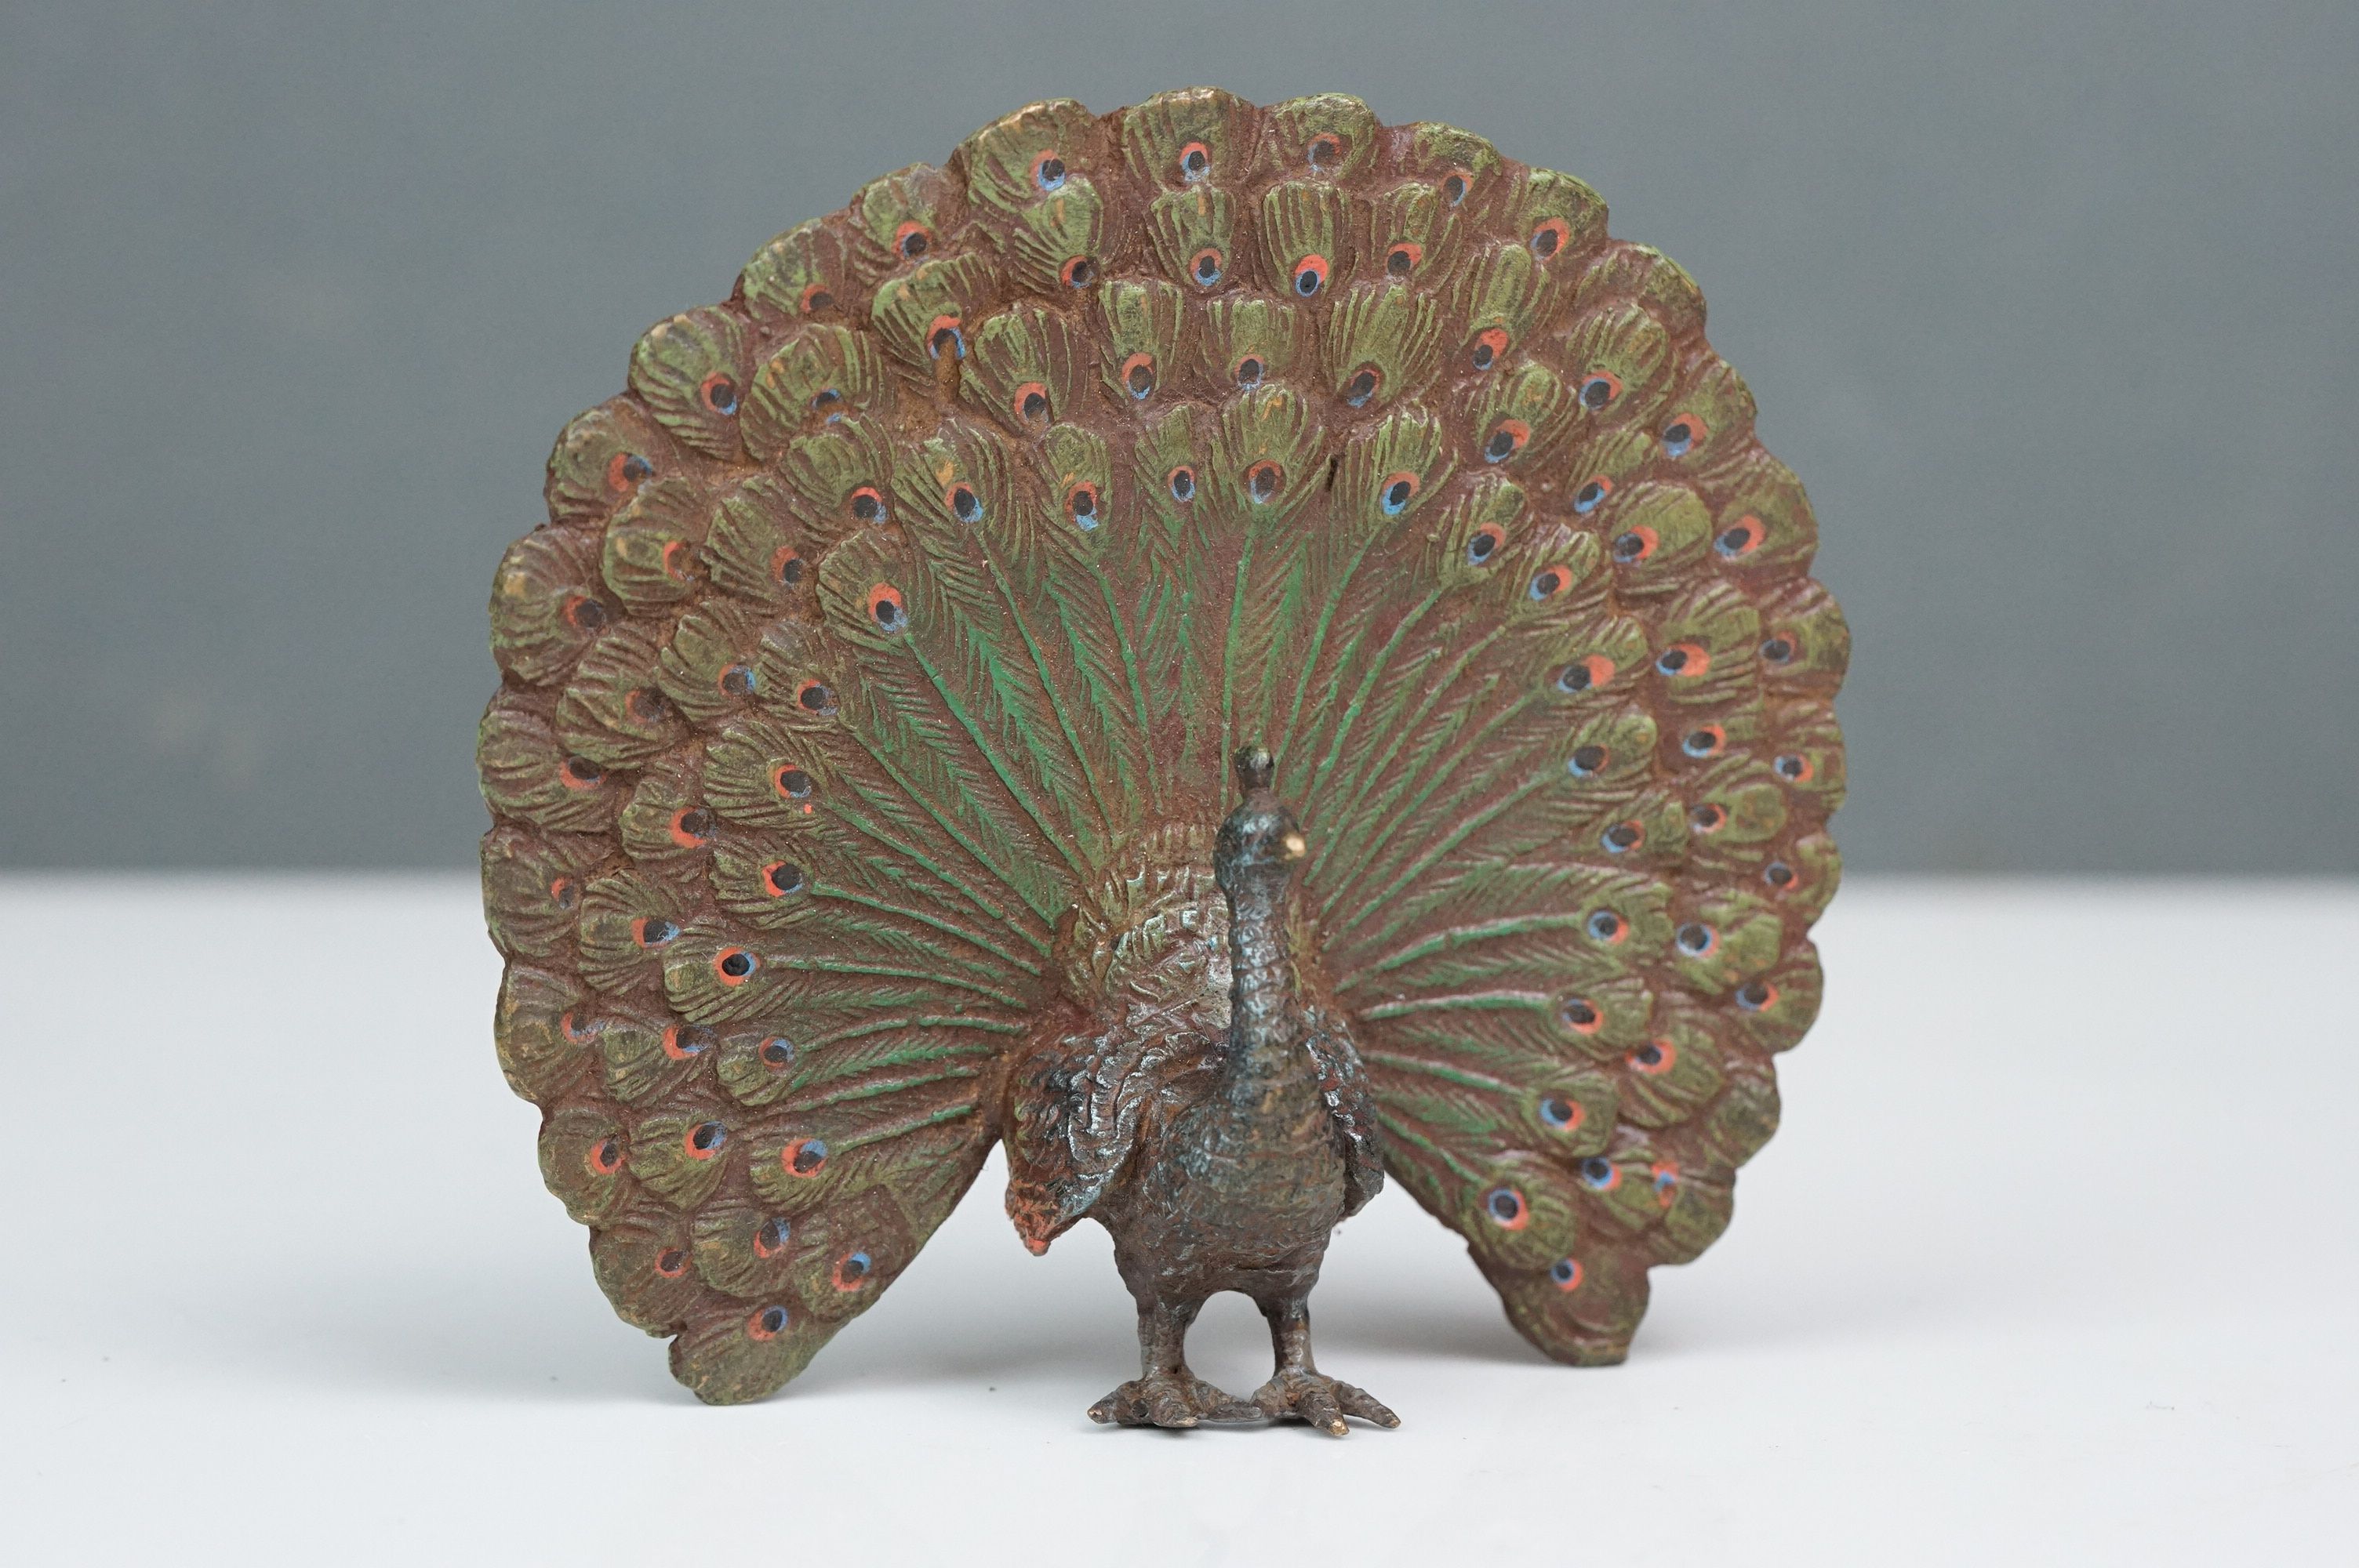 Cold painted bronze figure of a peacock with extended feathers